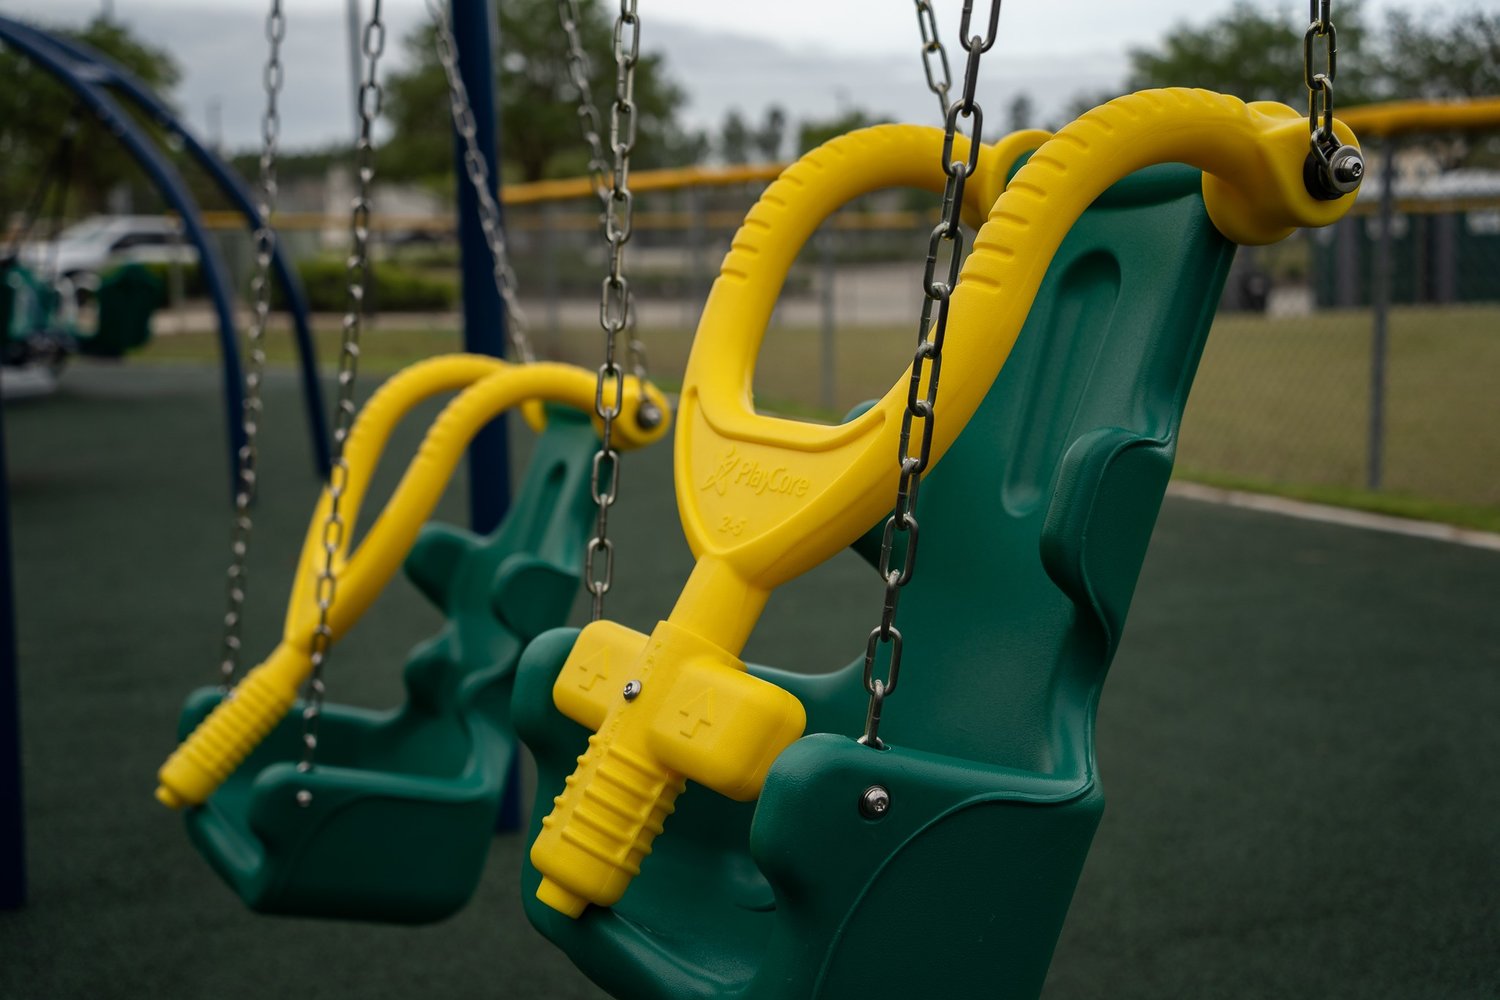 A new playground in St. Johns gives children the opportunity to play regardless of their physical abilities.